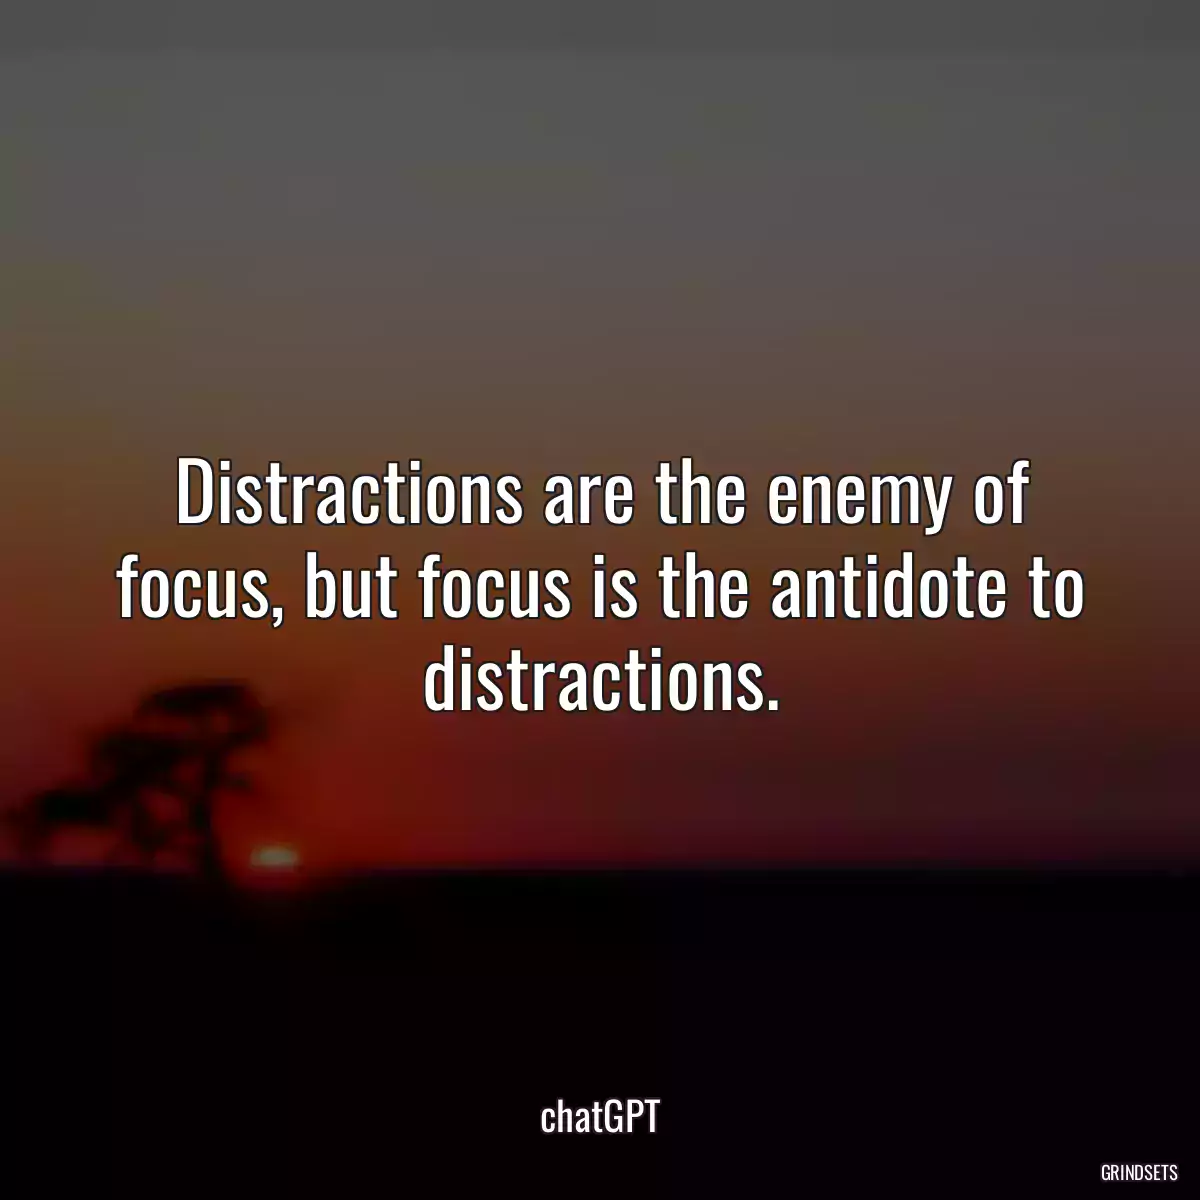 Distractions are the enemy of focus, but focus is the antidote to distractions.